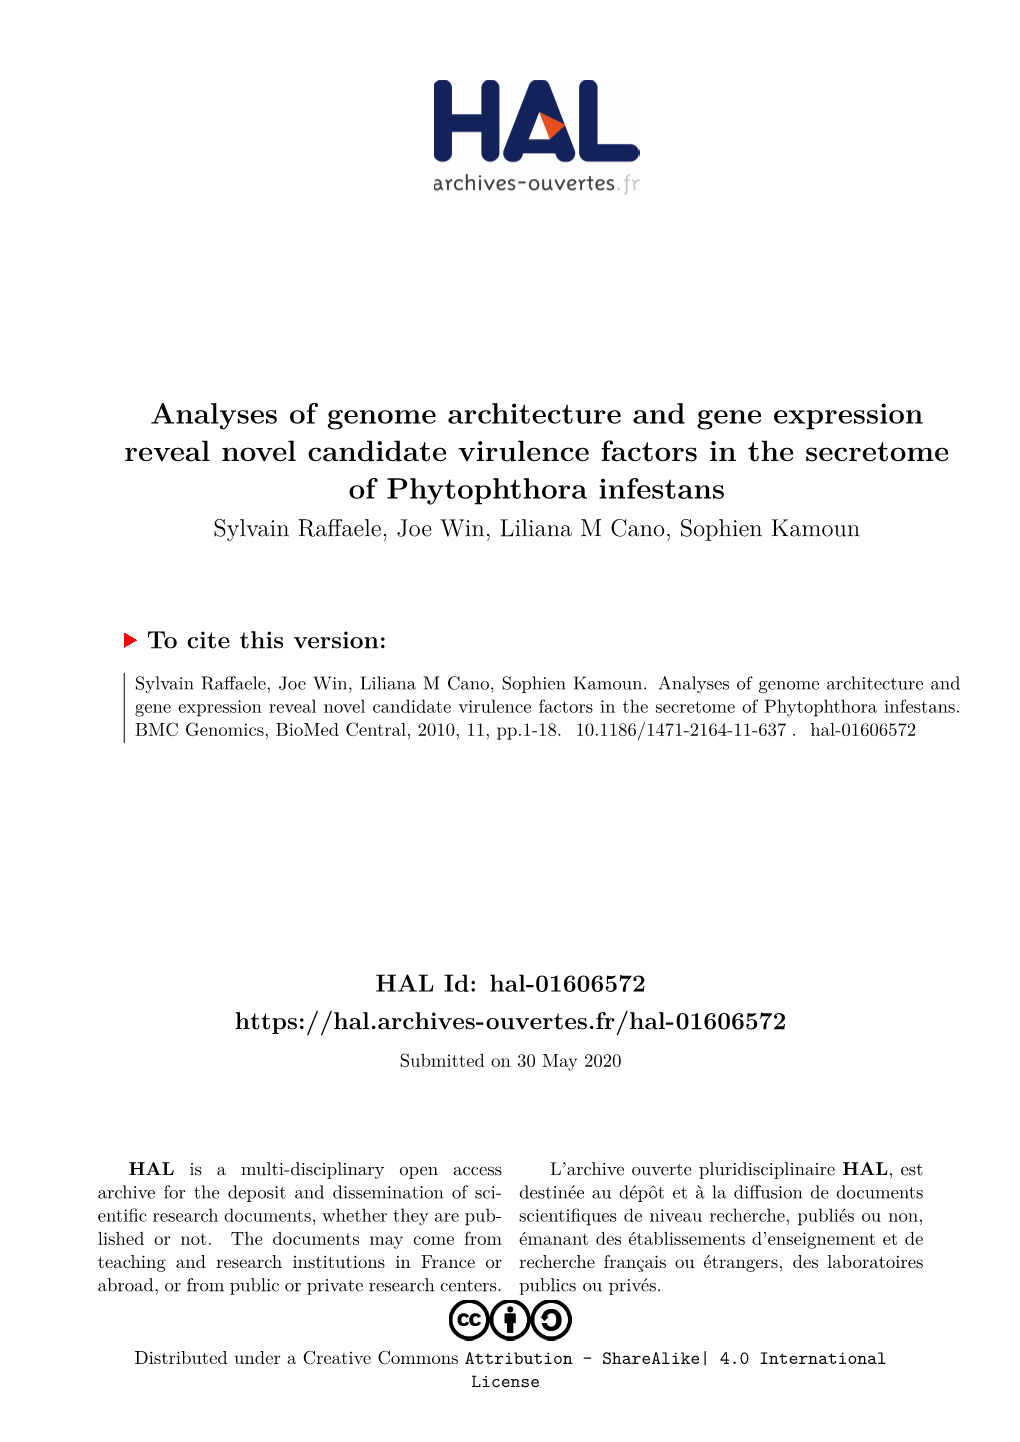 Analyses of Genome Architecture and Gene